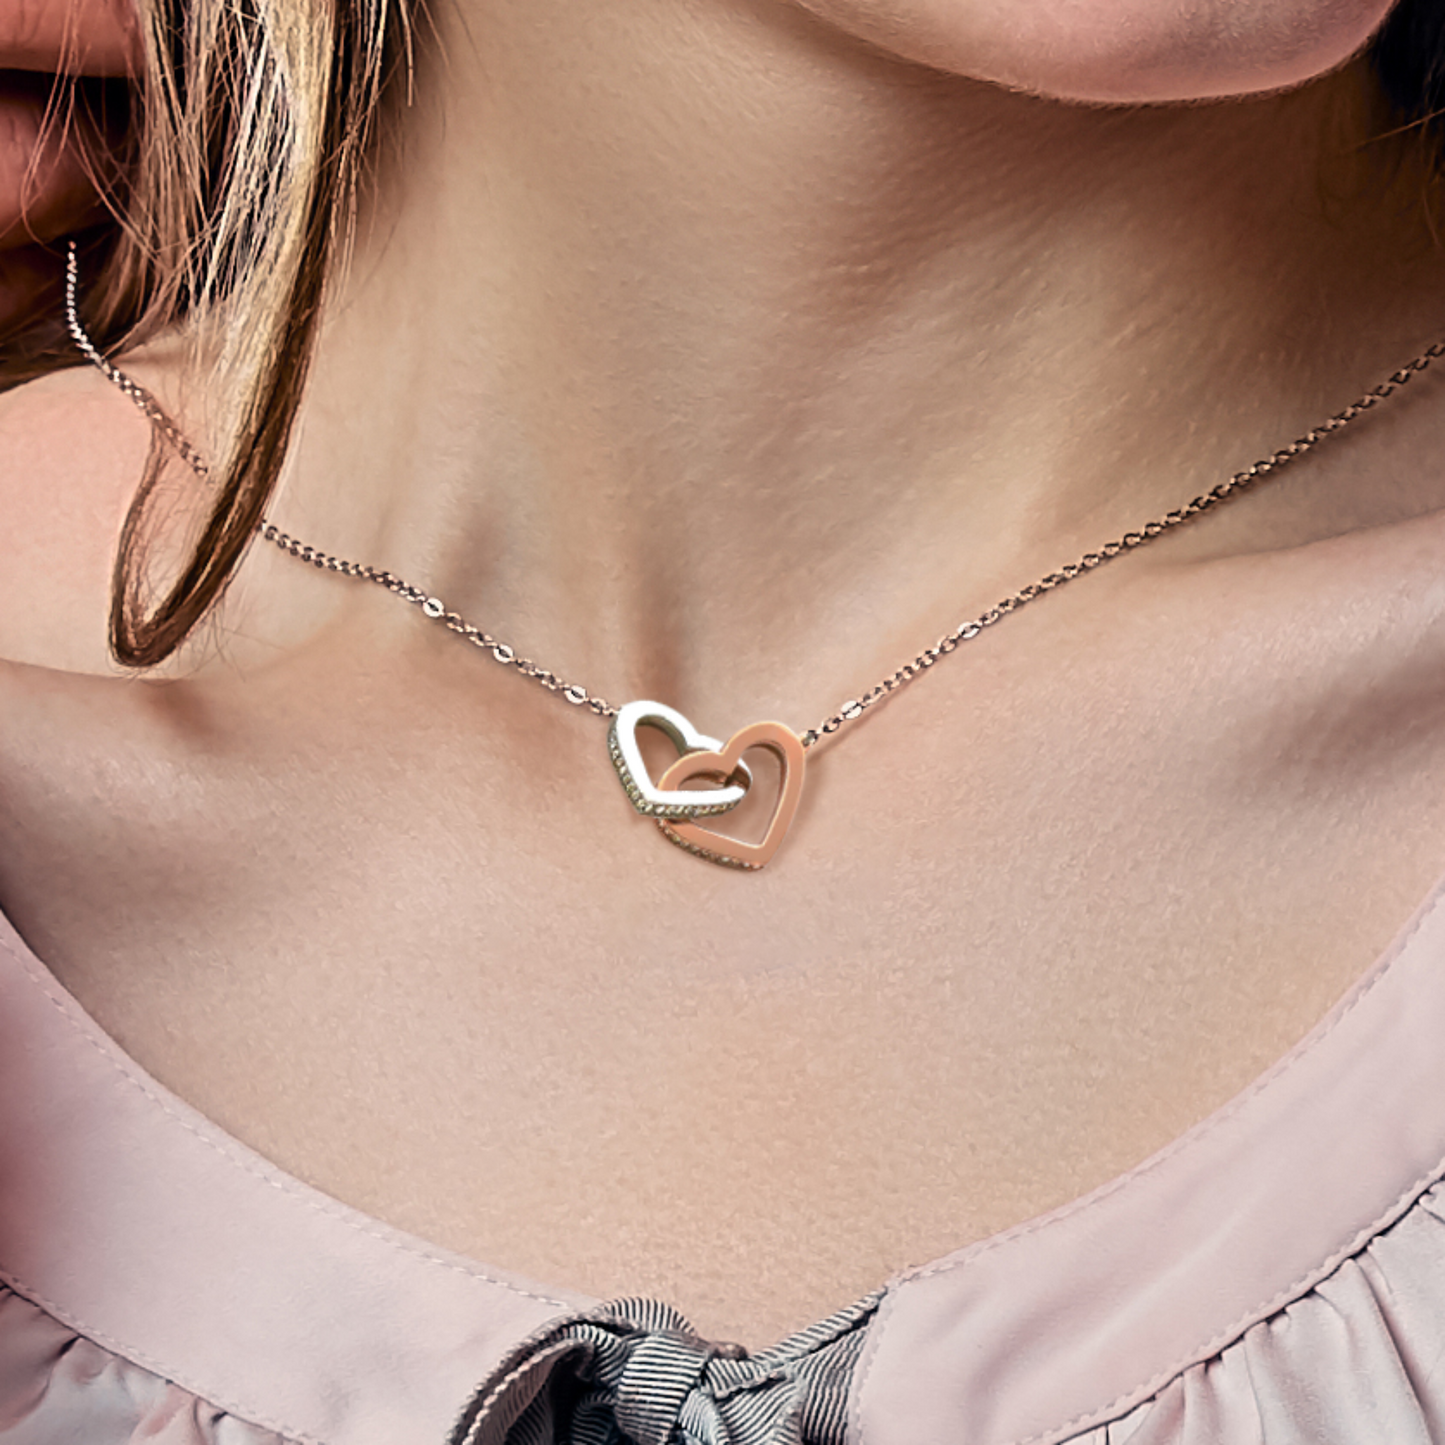 Personalized To My Granddaughter Interlocking Hearts Necklace From Grandma - Merry Christmas #e199